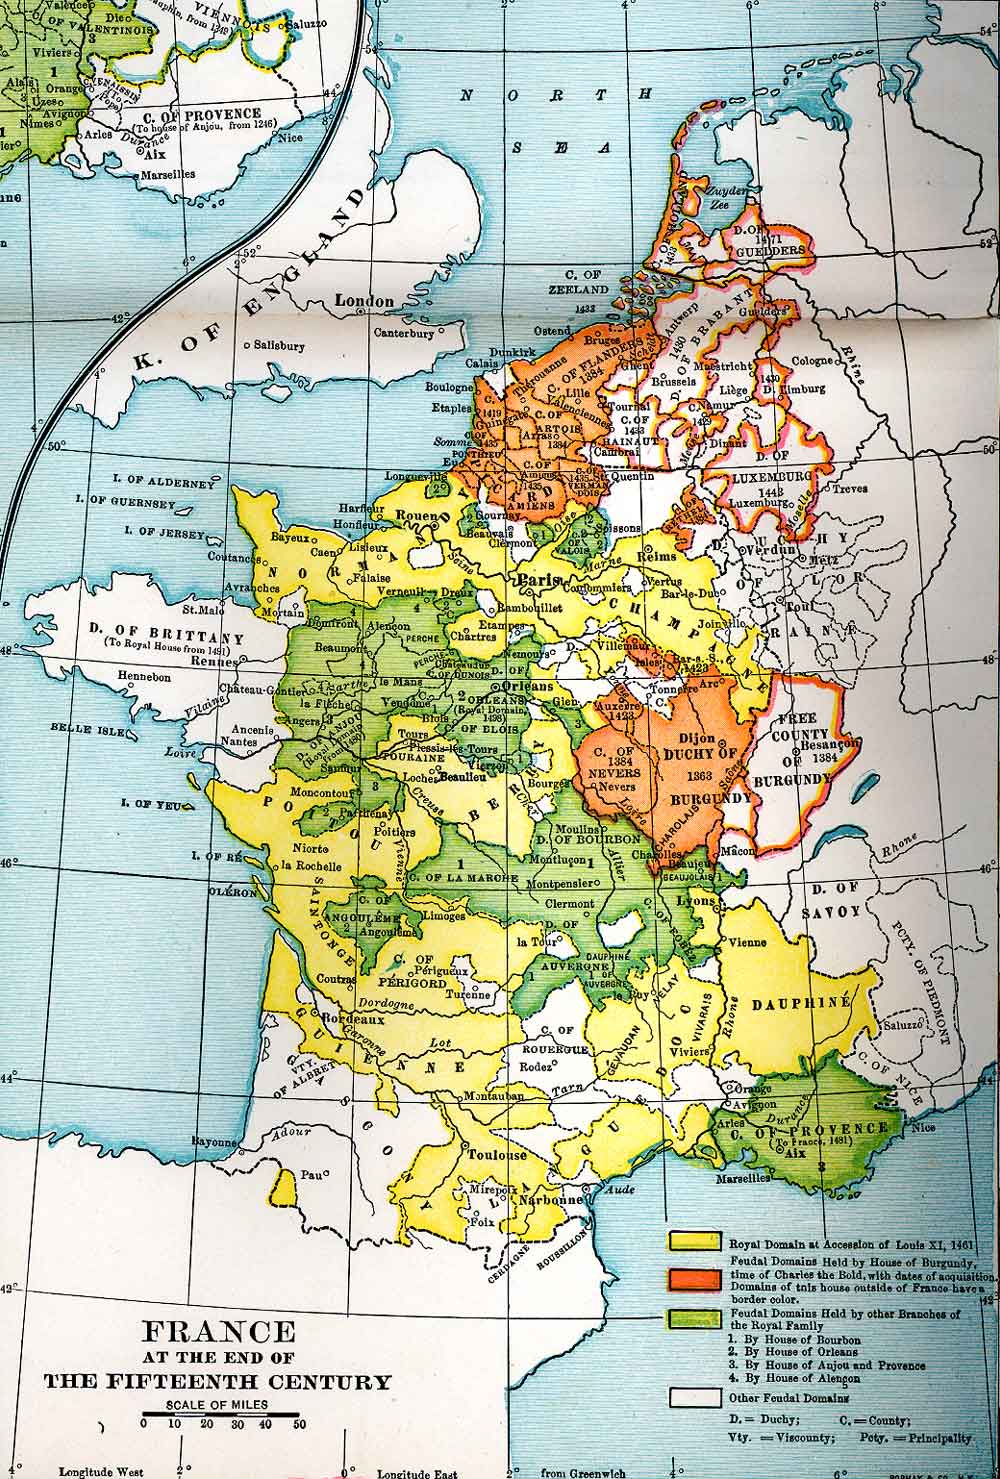 France at the End of the Fifteenth Century